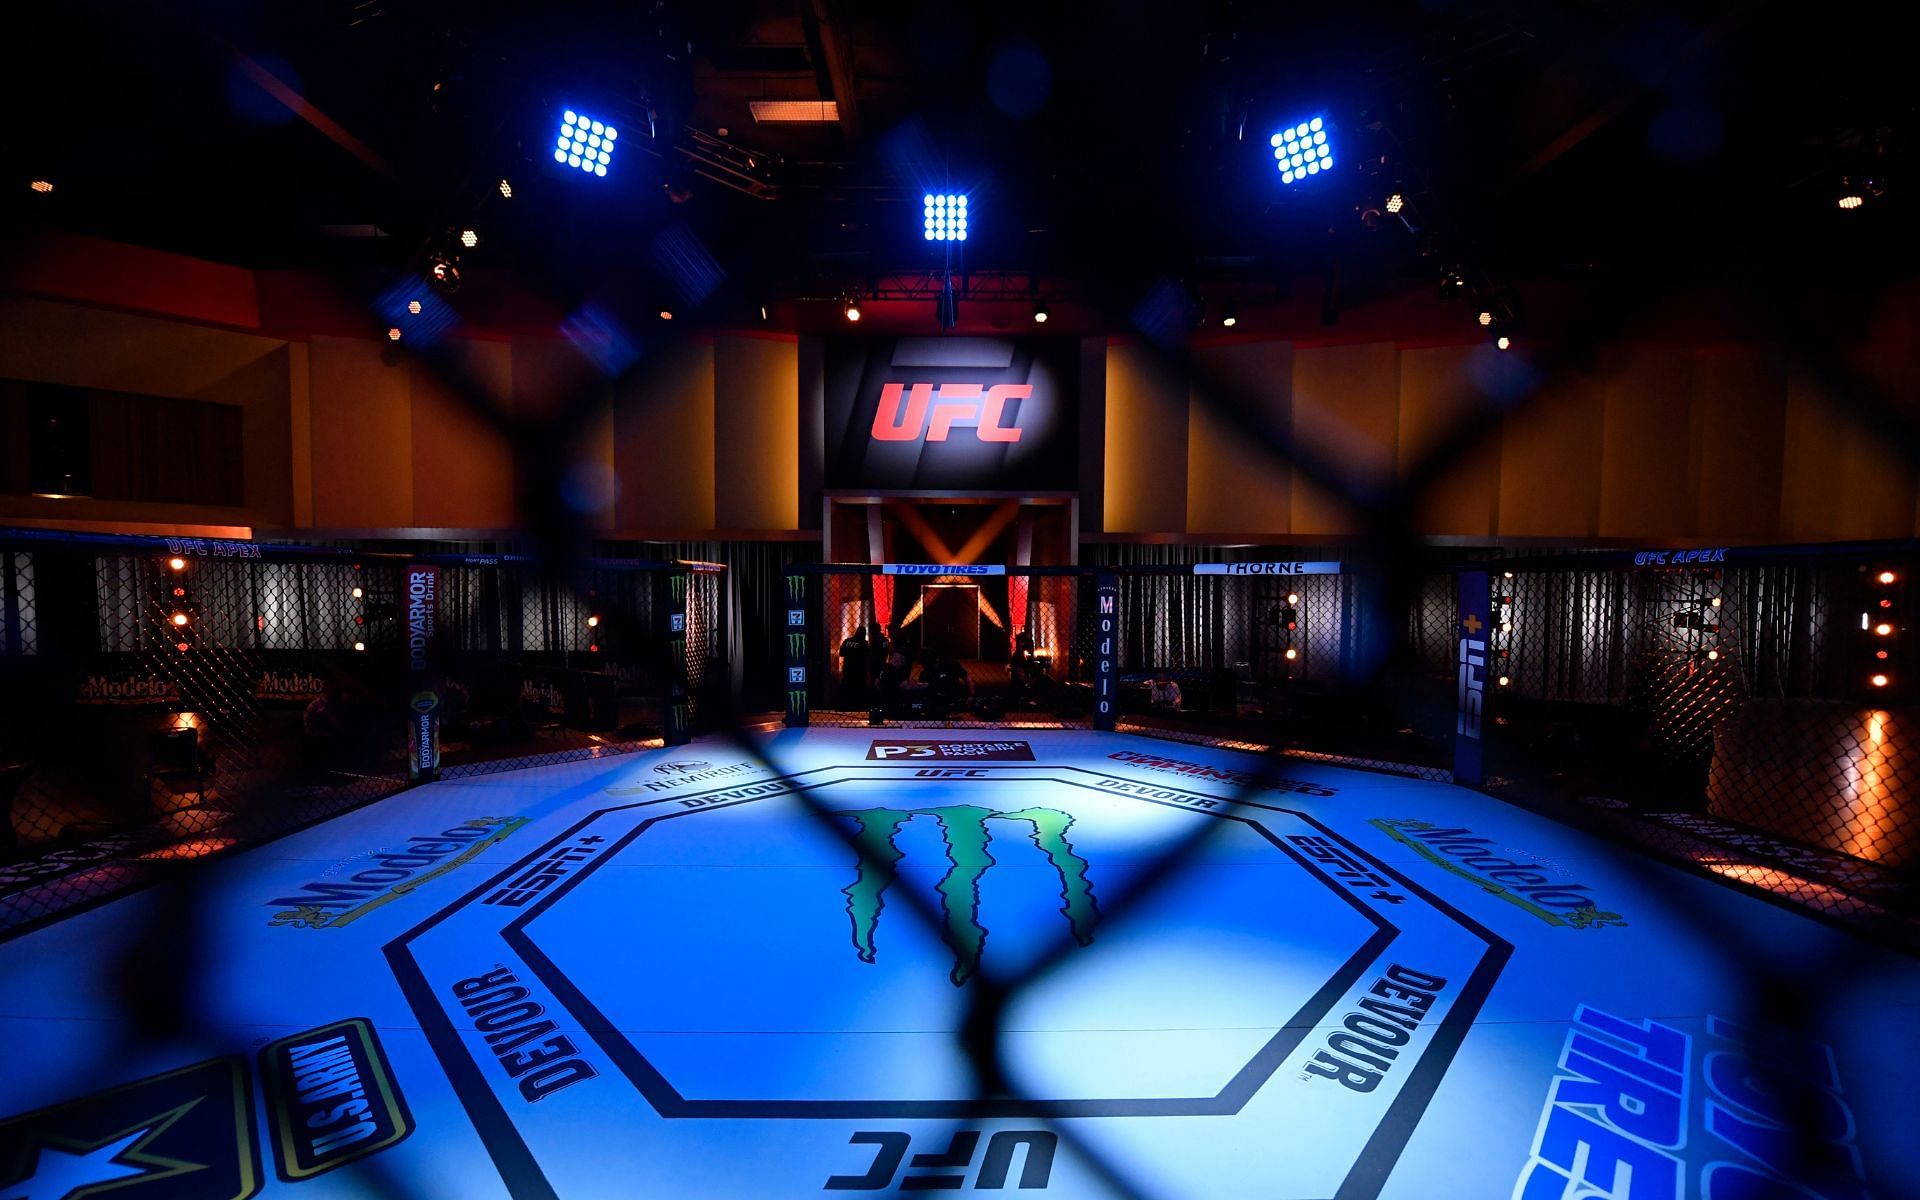 The world-famous UFC Octagon during one of the pay-per-view events